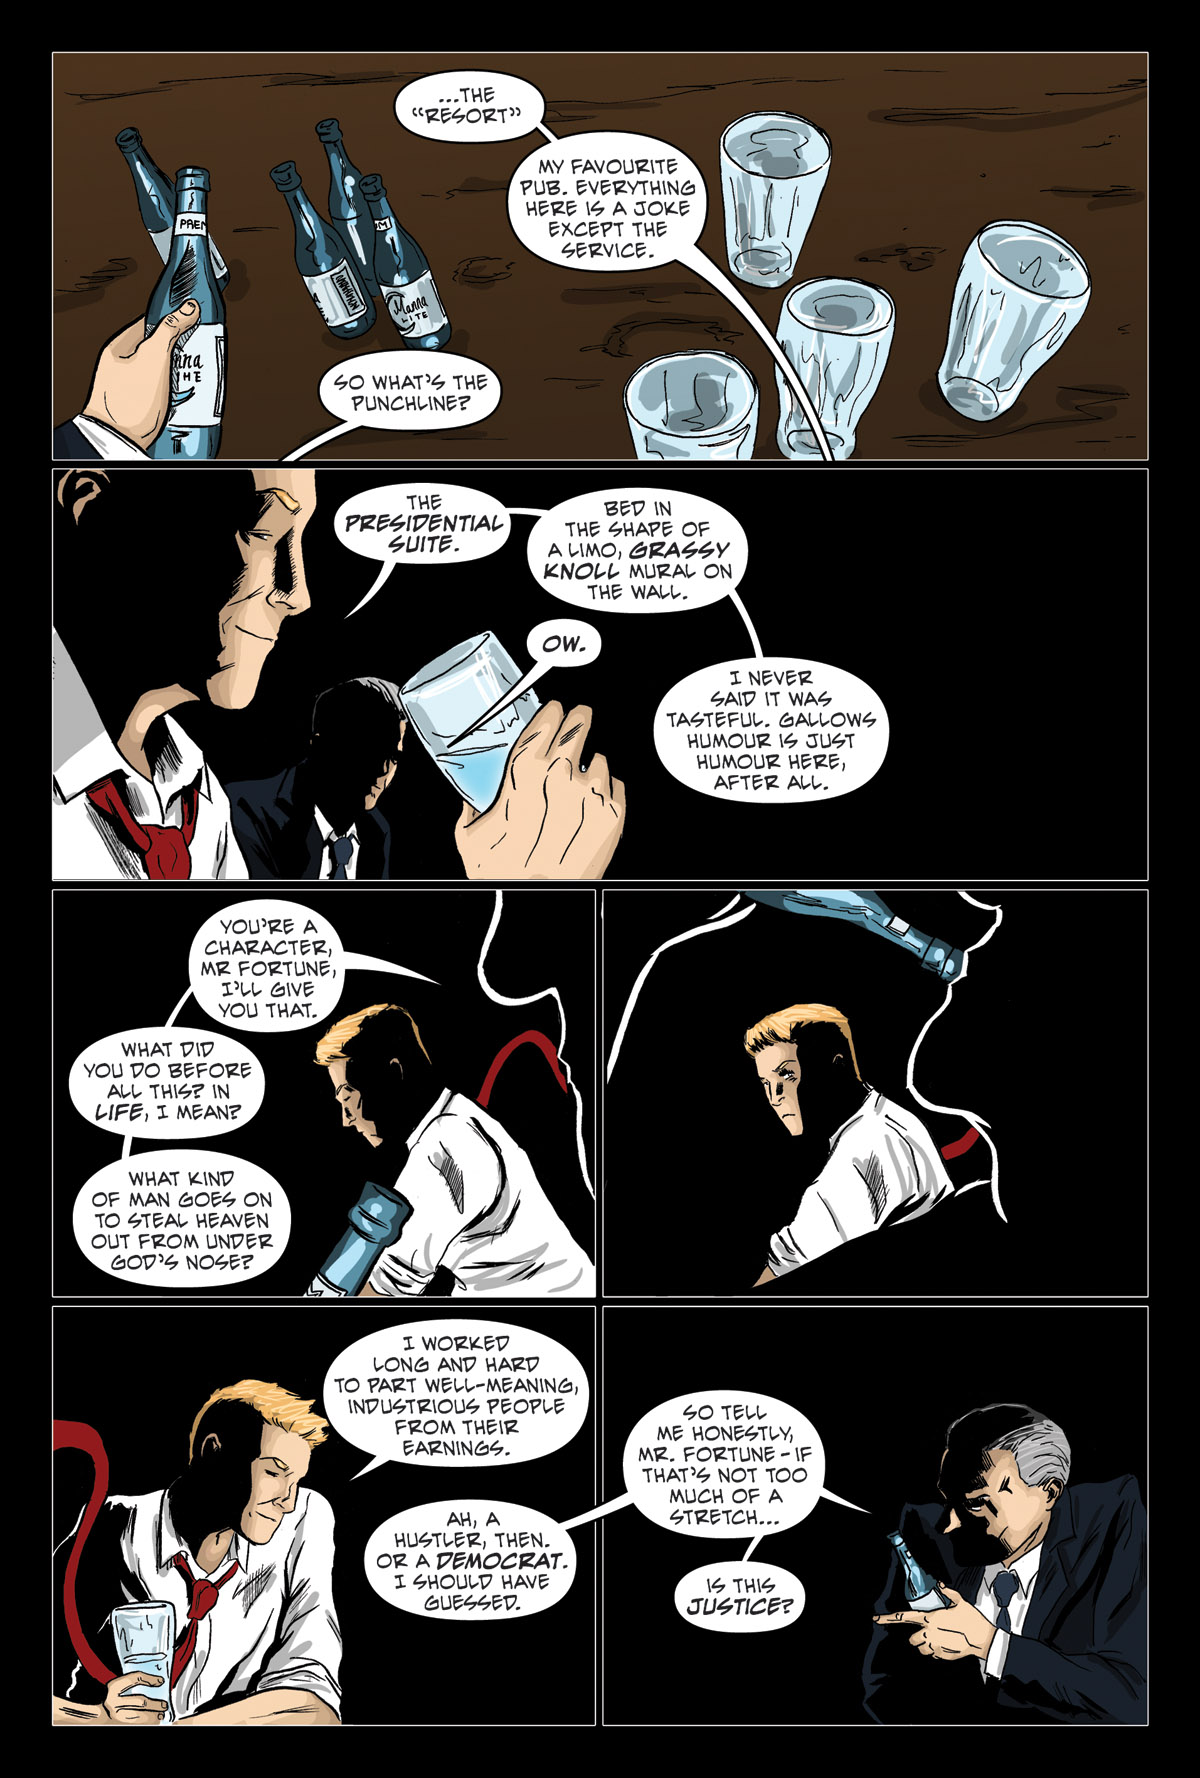 Afterlife Inc. | Death of a Salesman | Page 3